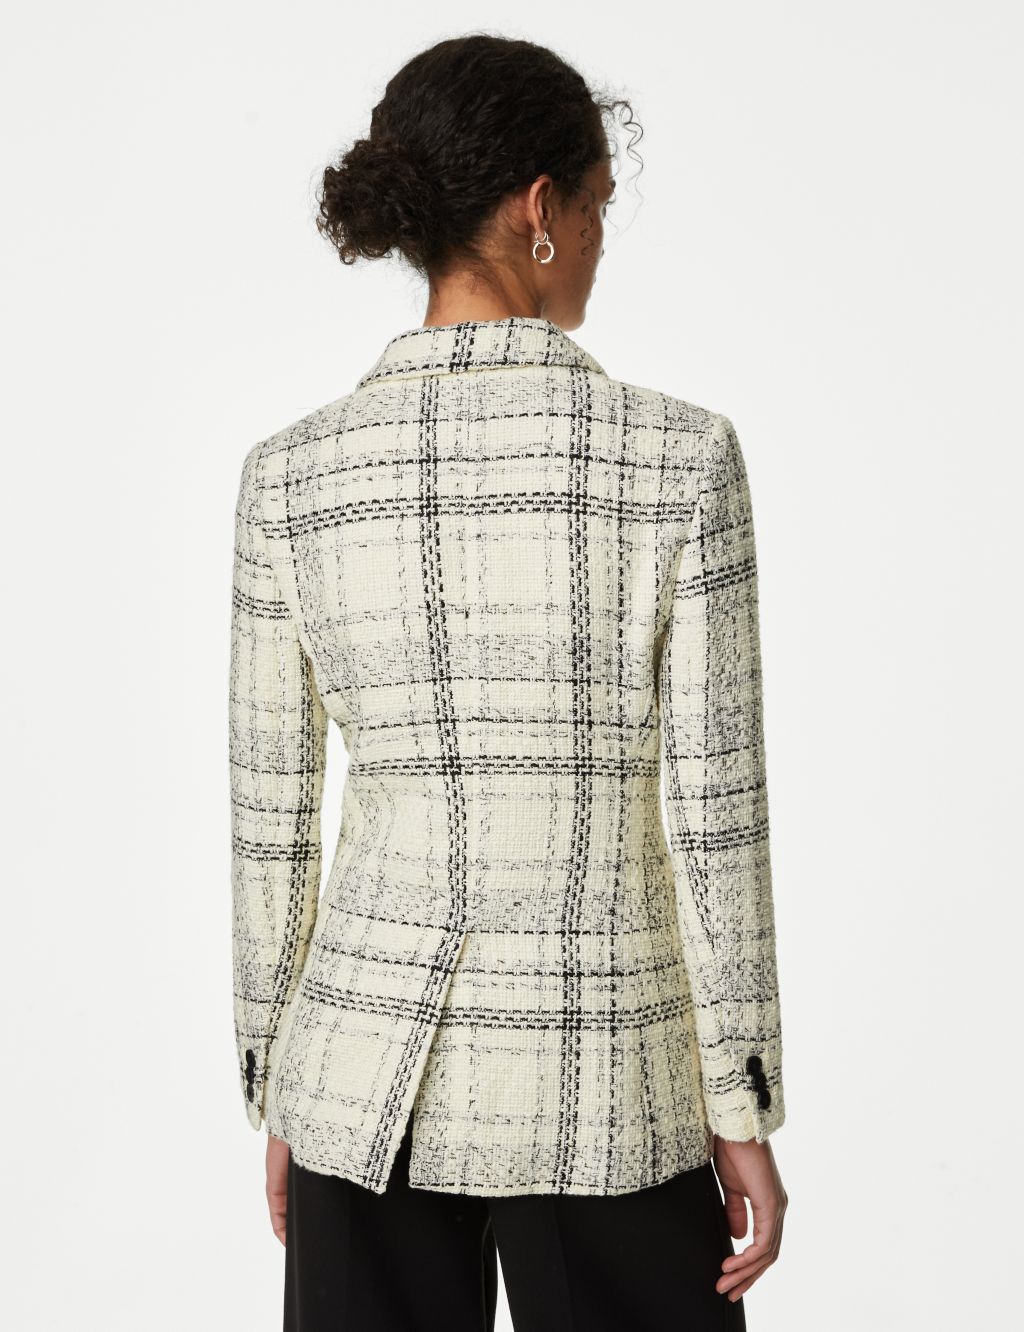 Tweed Tailored Double Breasted Blazer image 5